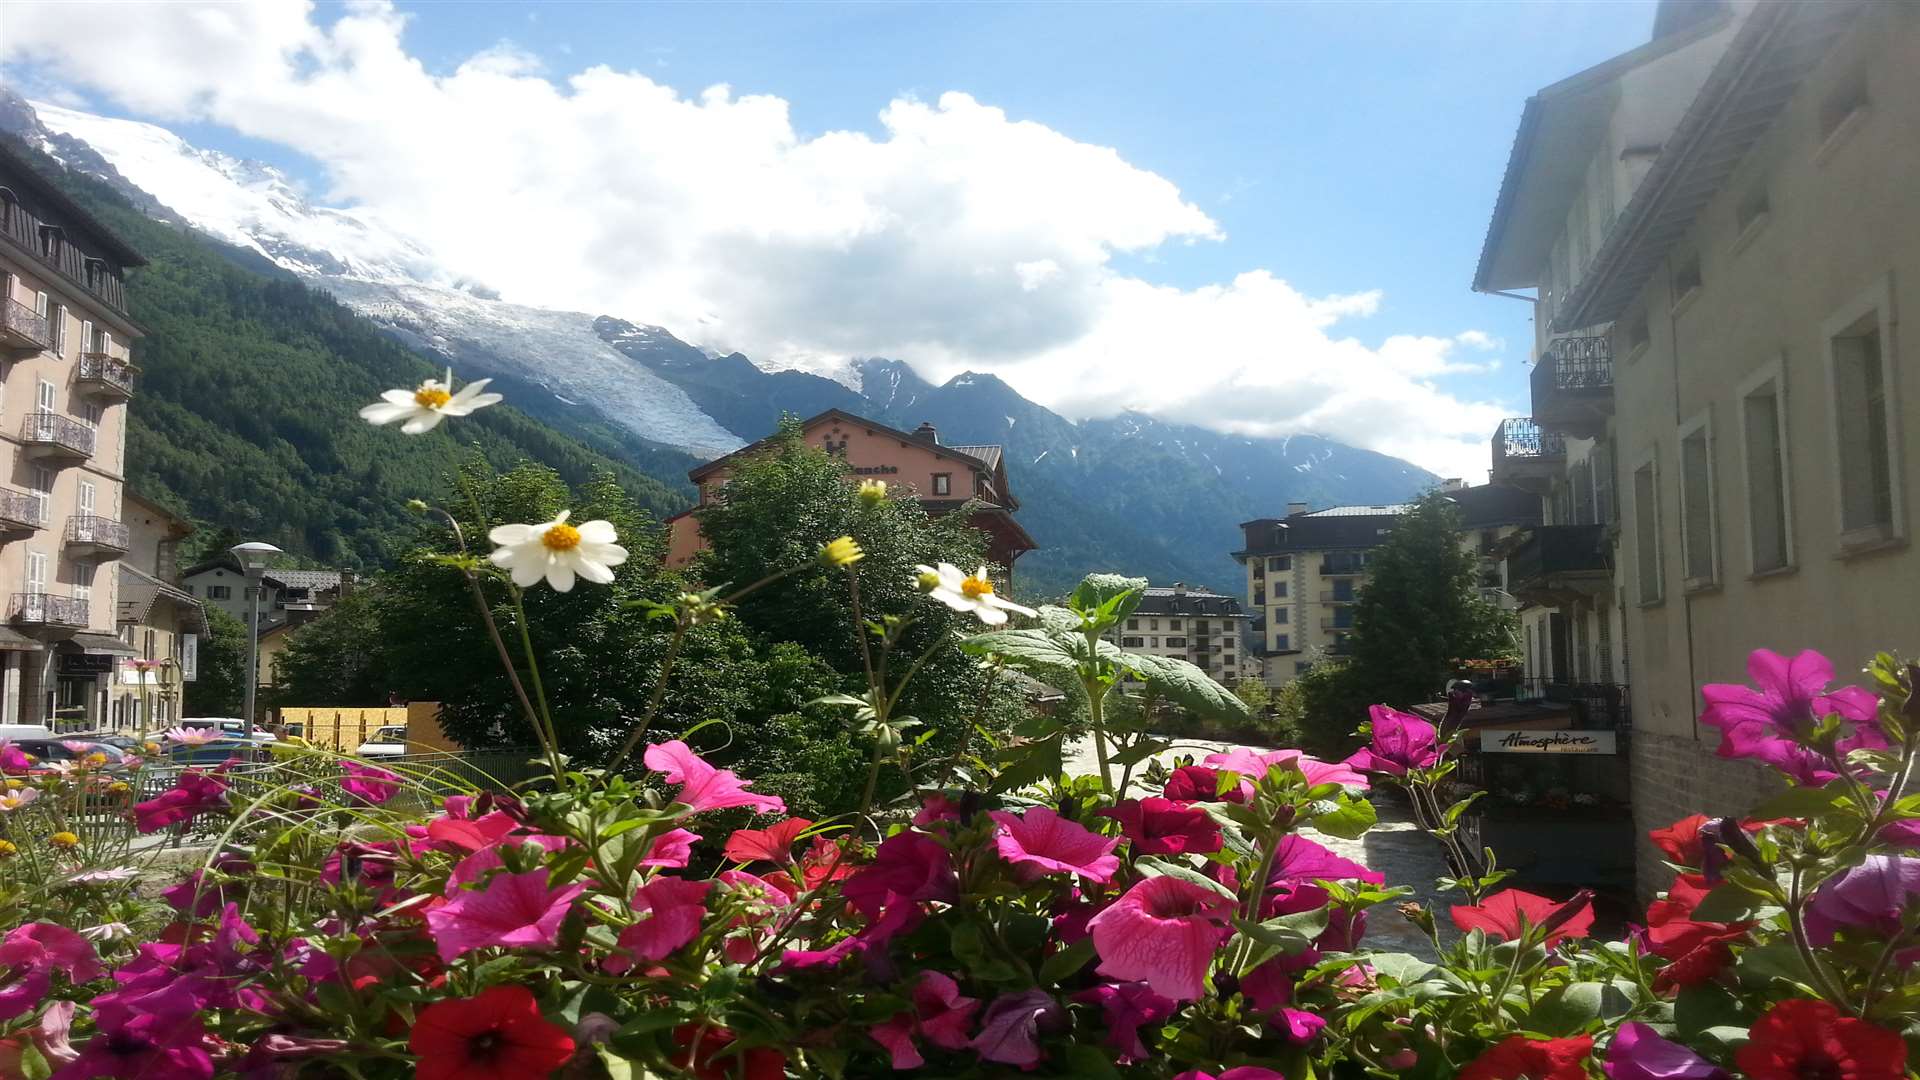 The flowers bloom amid a backdrop of mountains in sun-kissed Chamonix